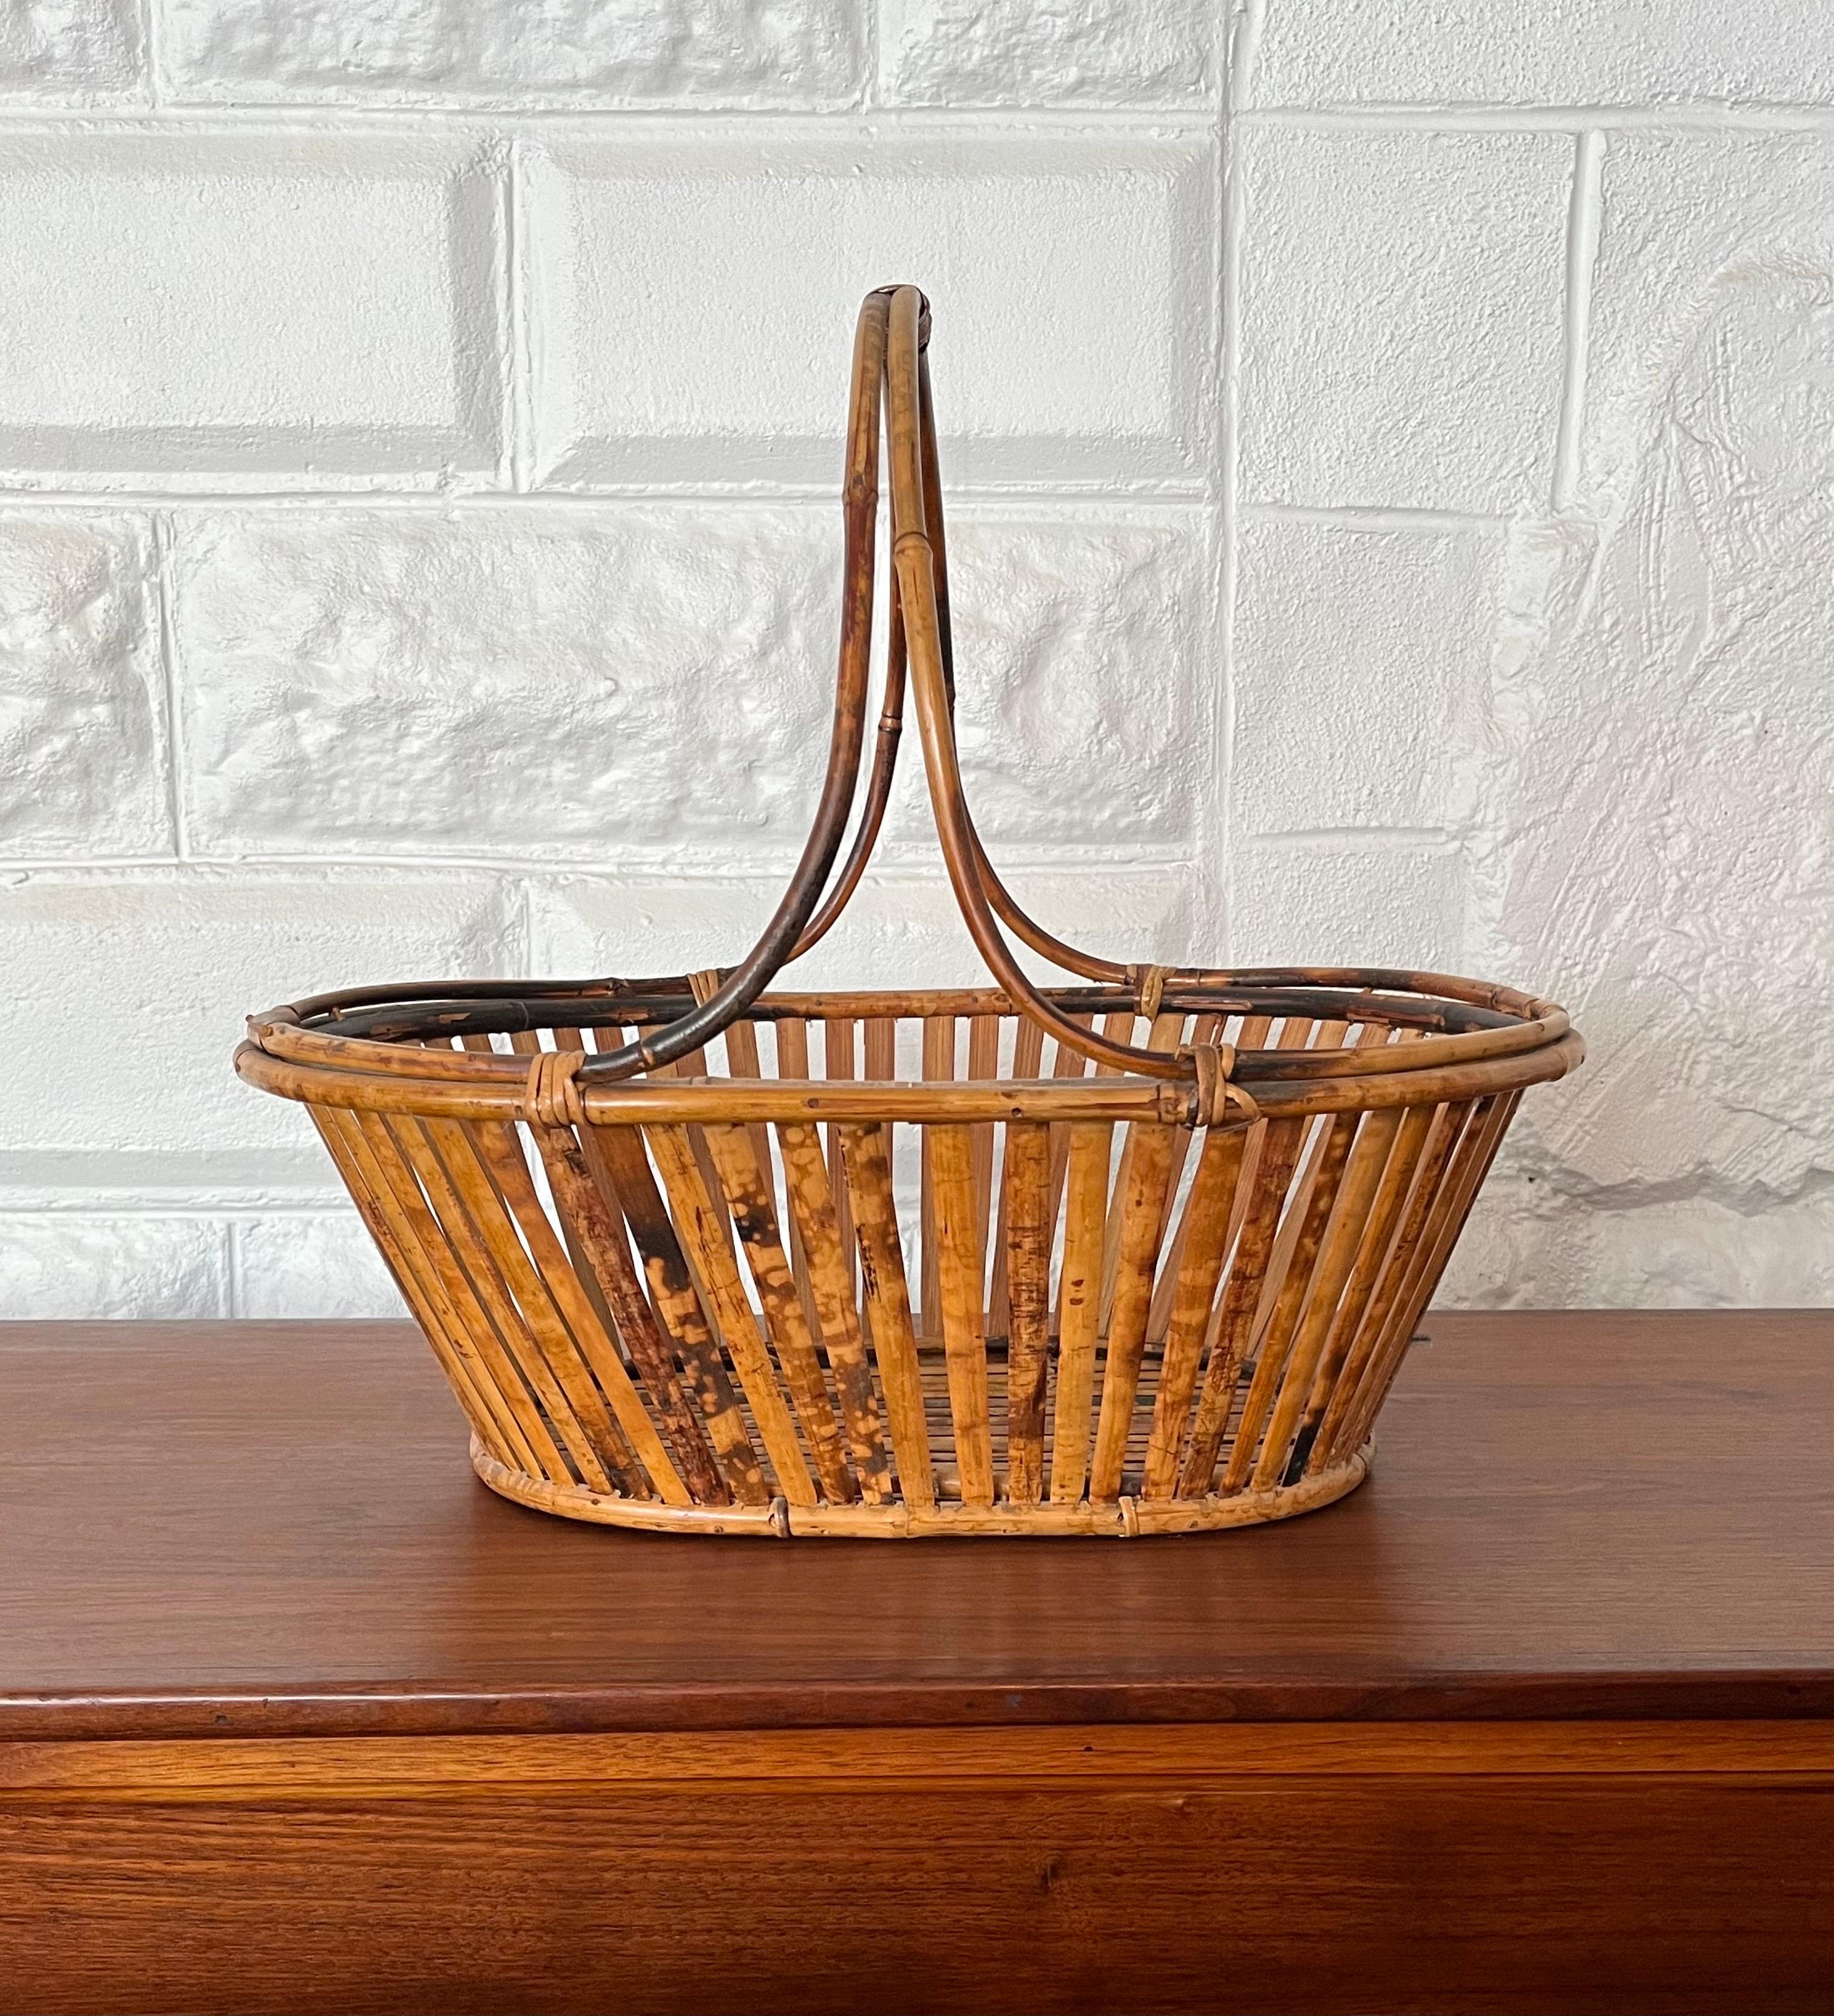 Beauty in its simplicity. Flat reed rattan basket with unique twisting rattan frame and handle. Eye meanders up and around the handle in a reverse directional manner. Simply chic.